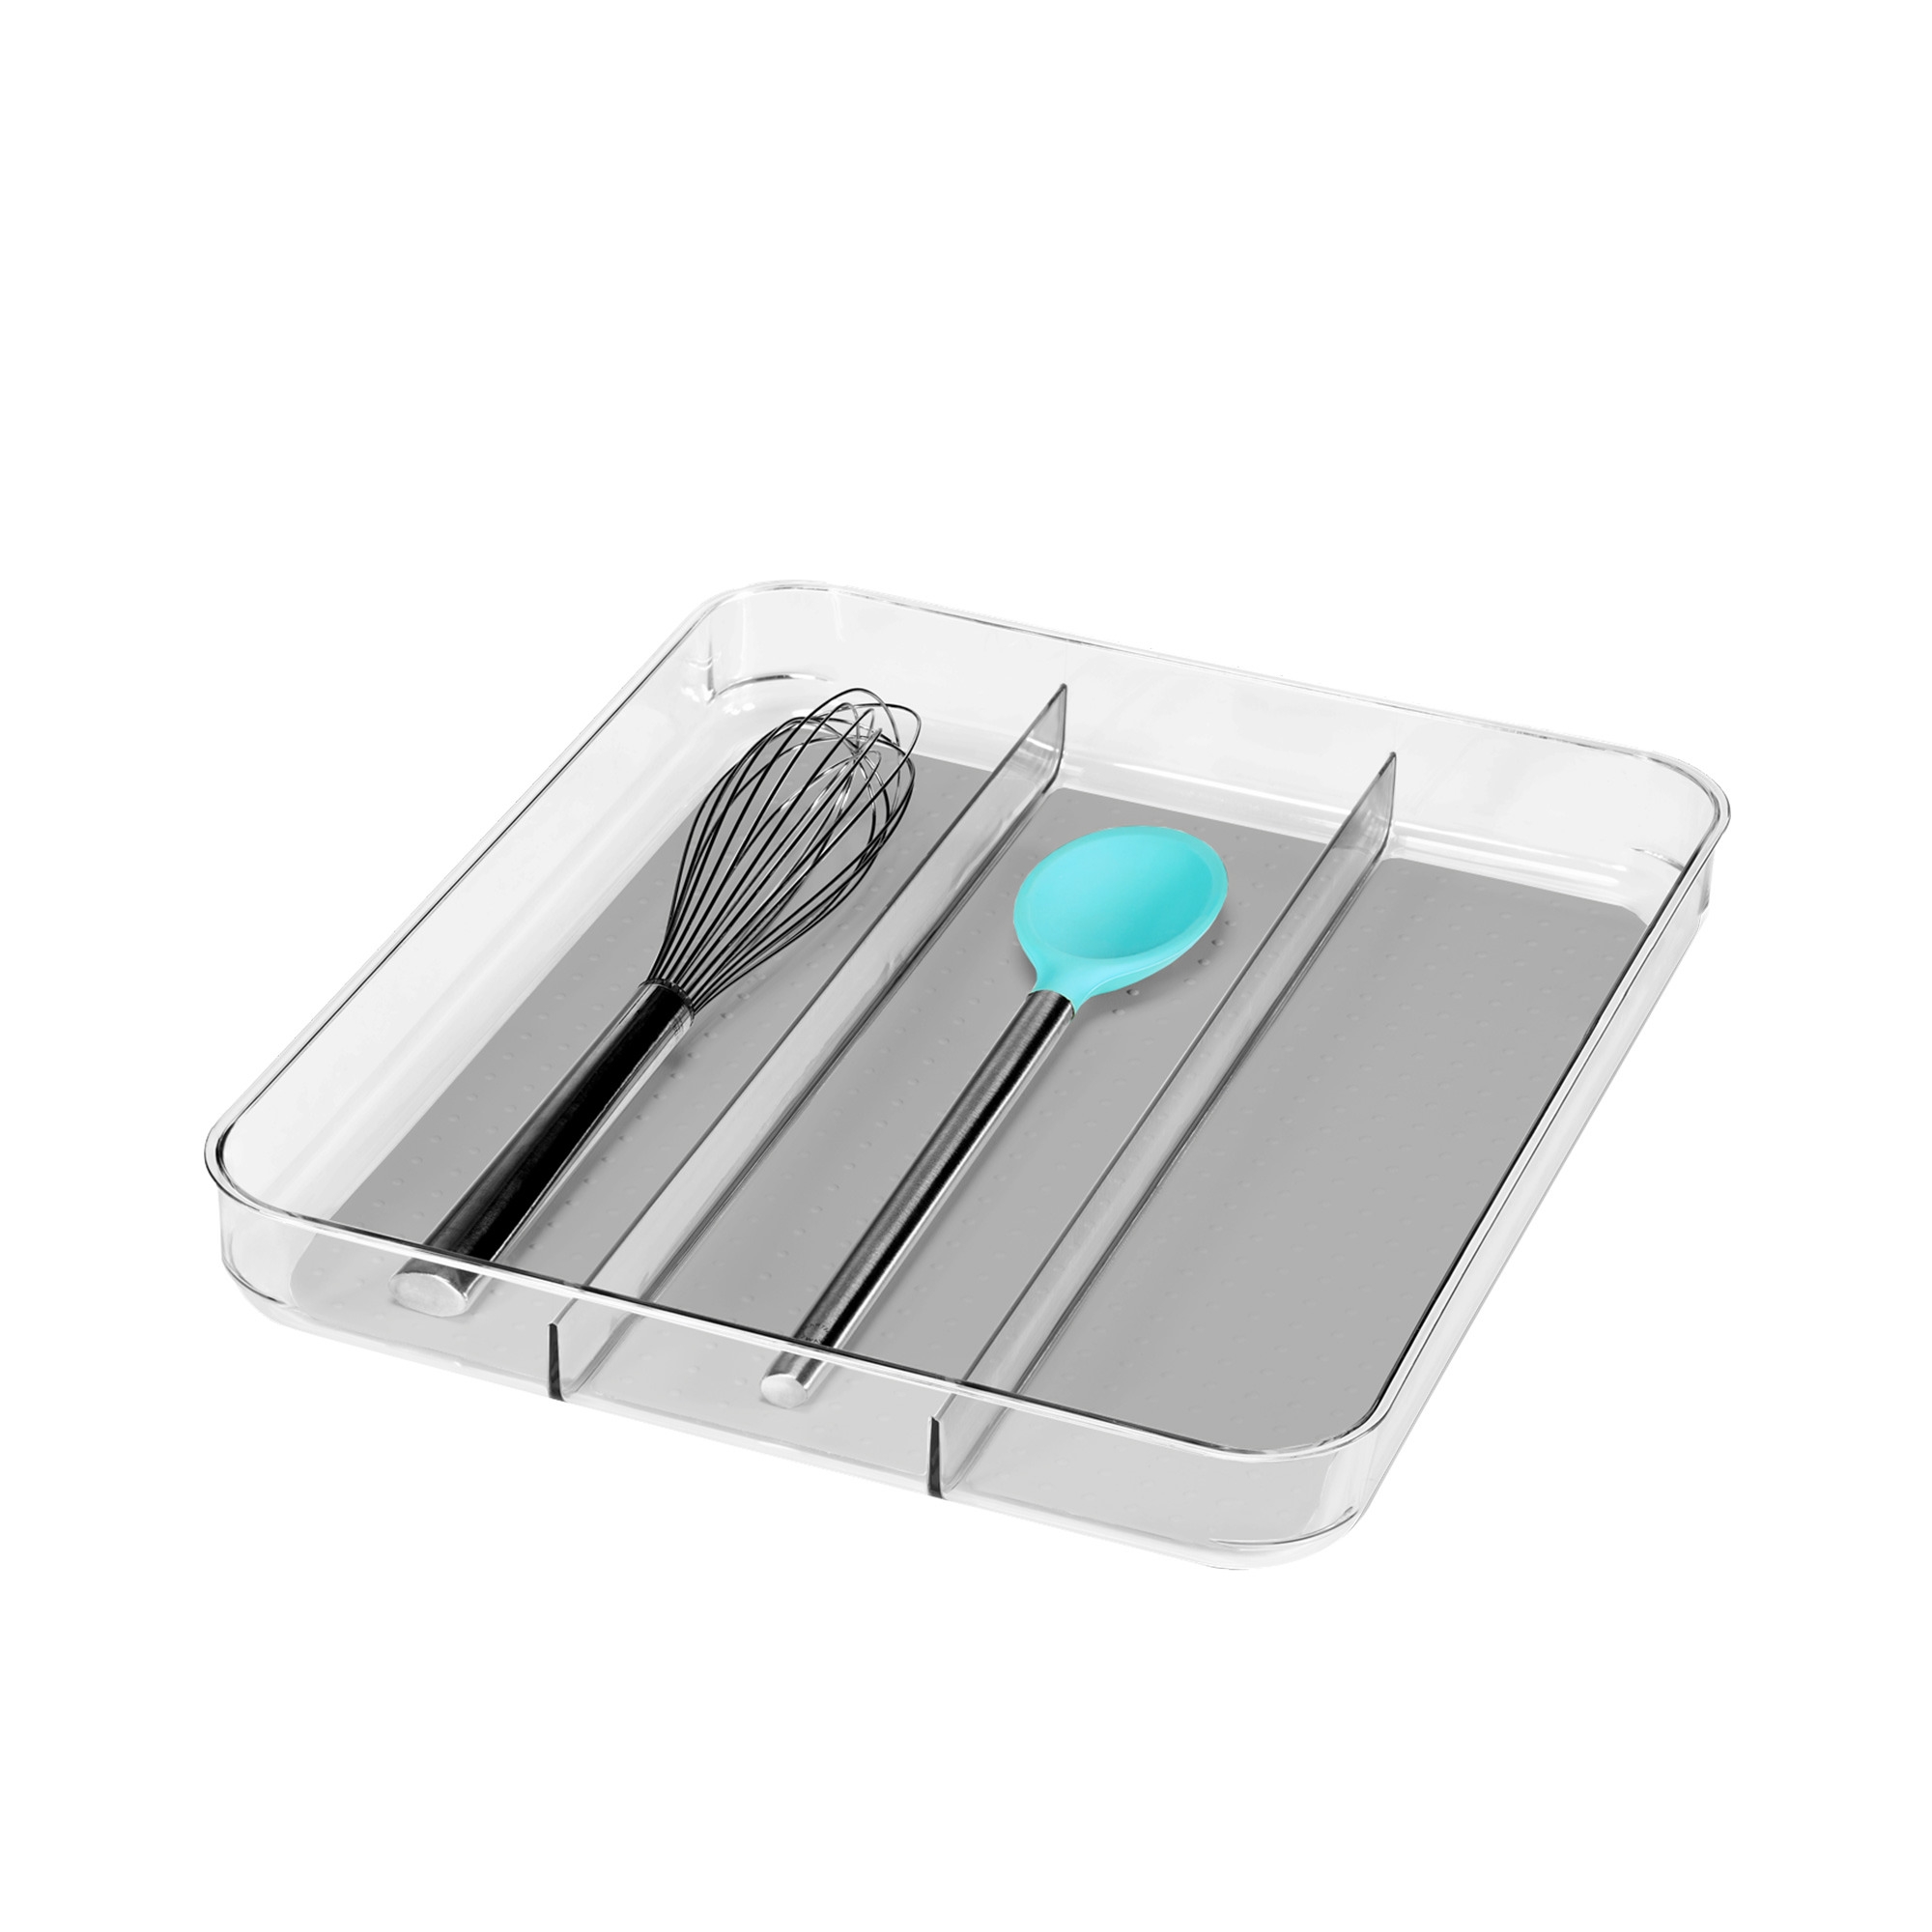 Madesmart Soft Grip Utensil Tray Clear Image 1